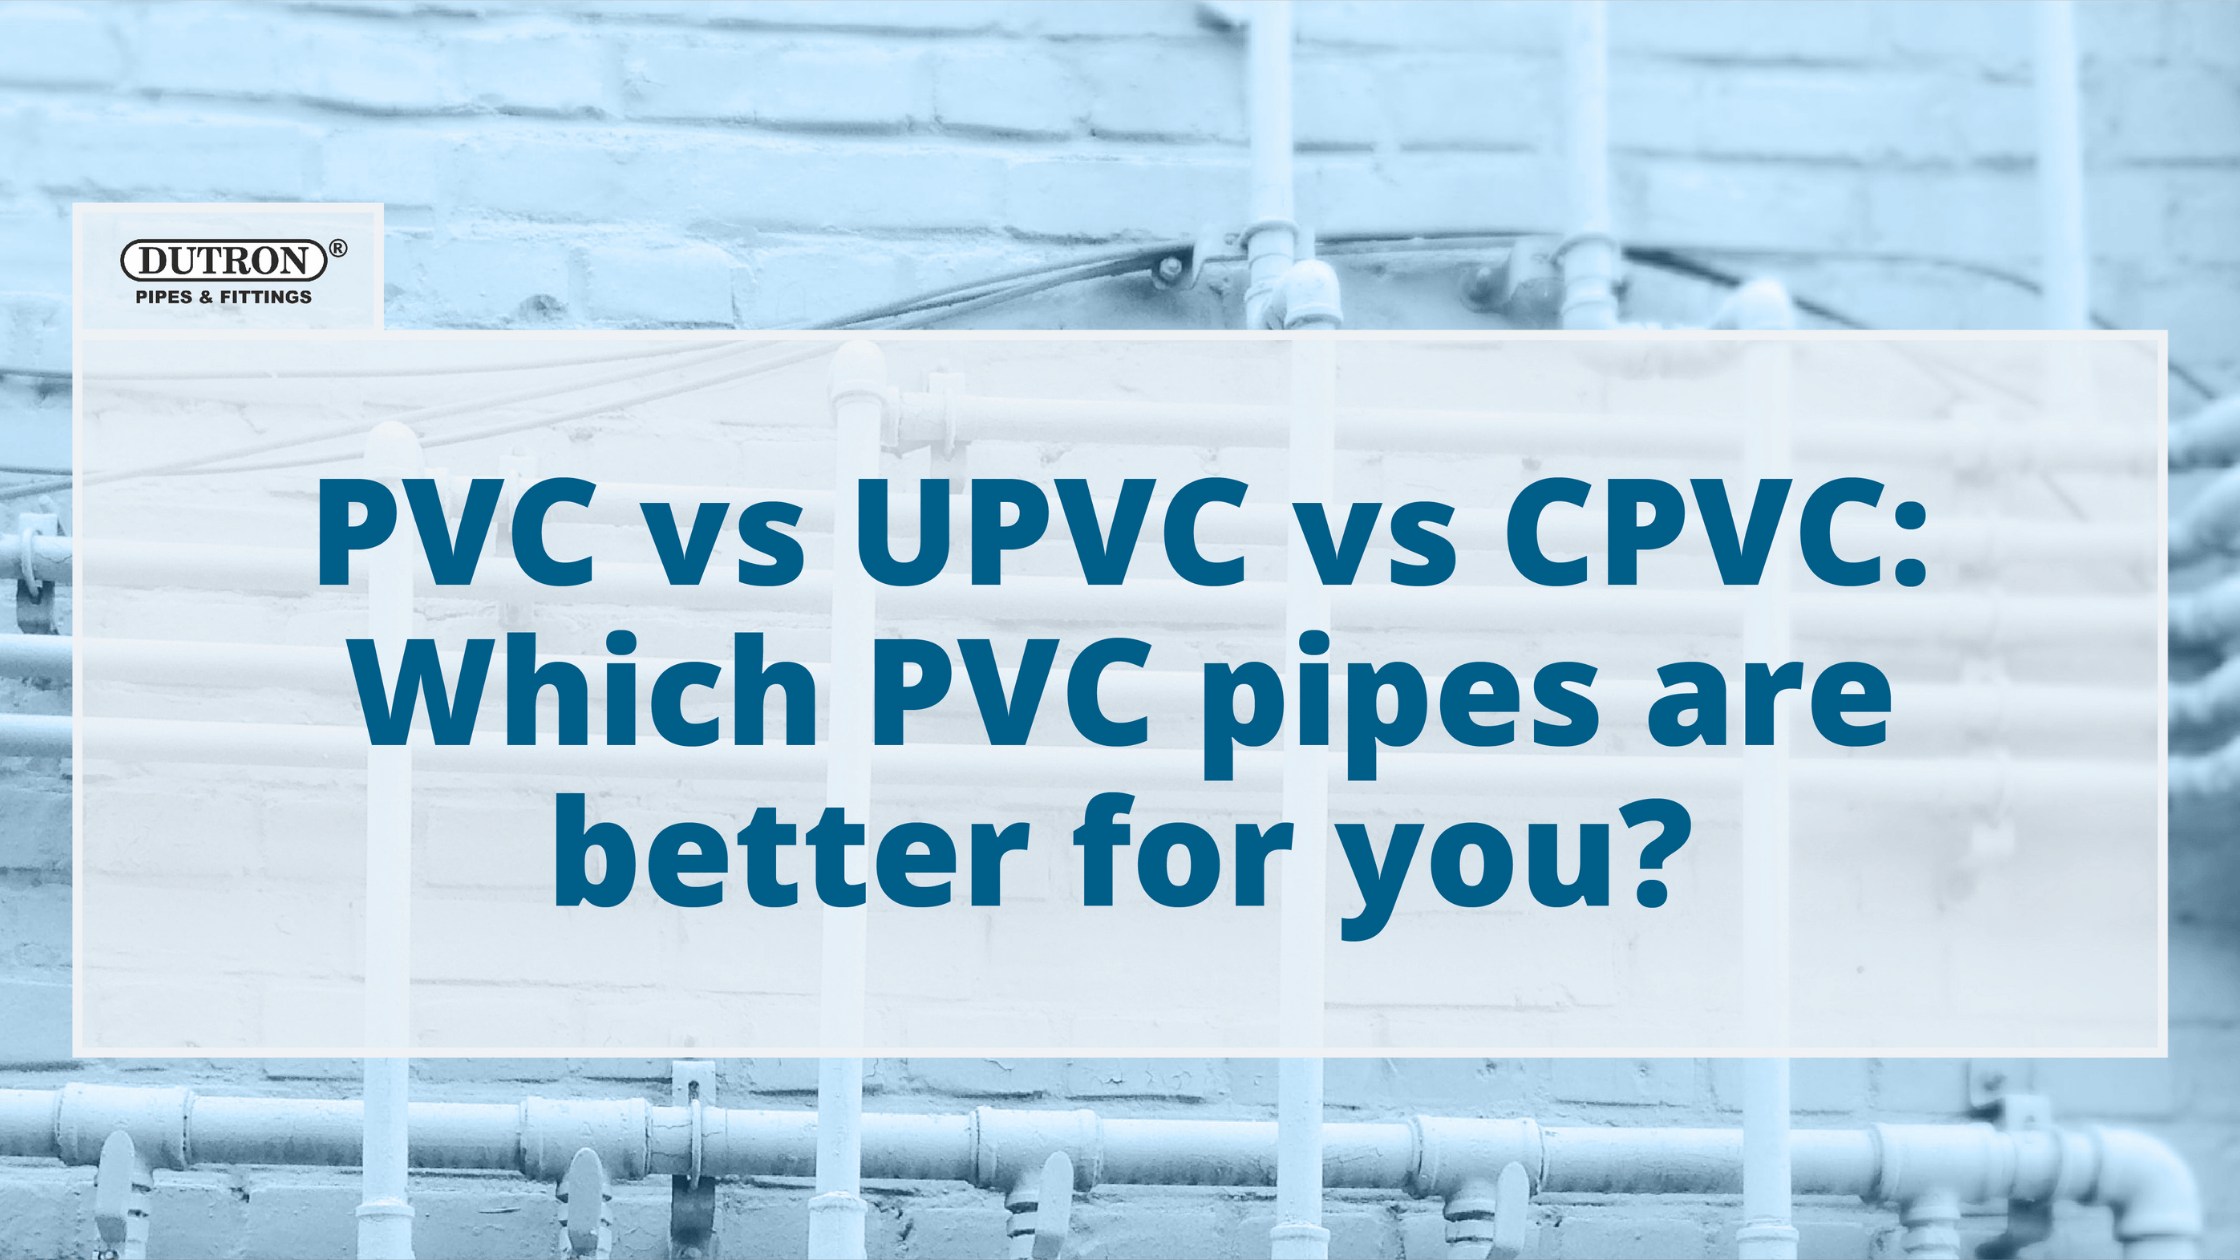 Which PVC Pipes are better for you?